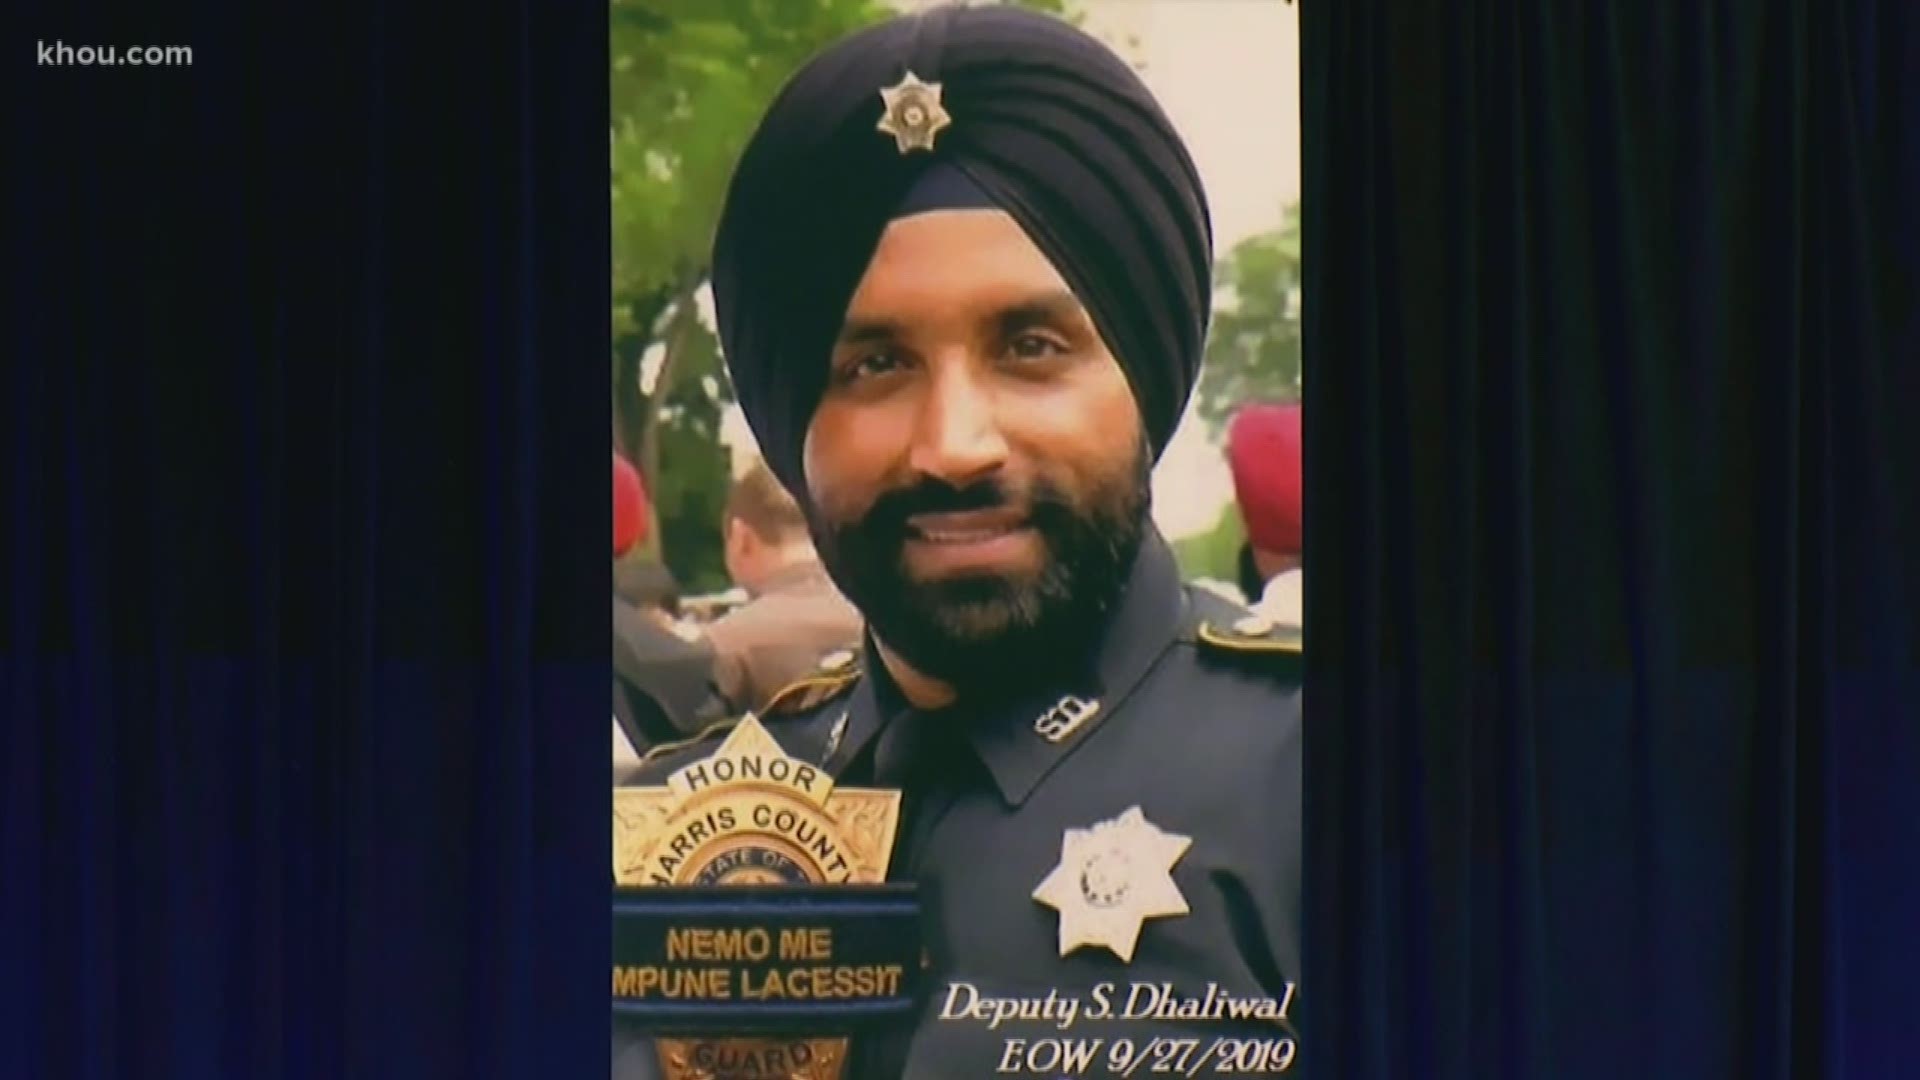 Two different memorials back-to-back united people from all backgrounds to honor the life of Deputy Sandeep Dhaliwal.